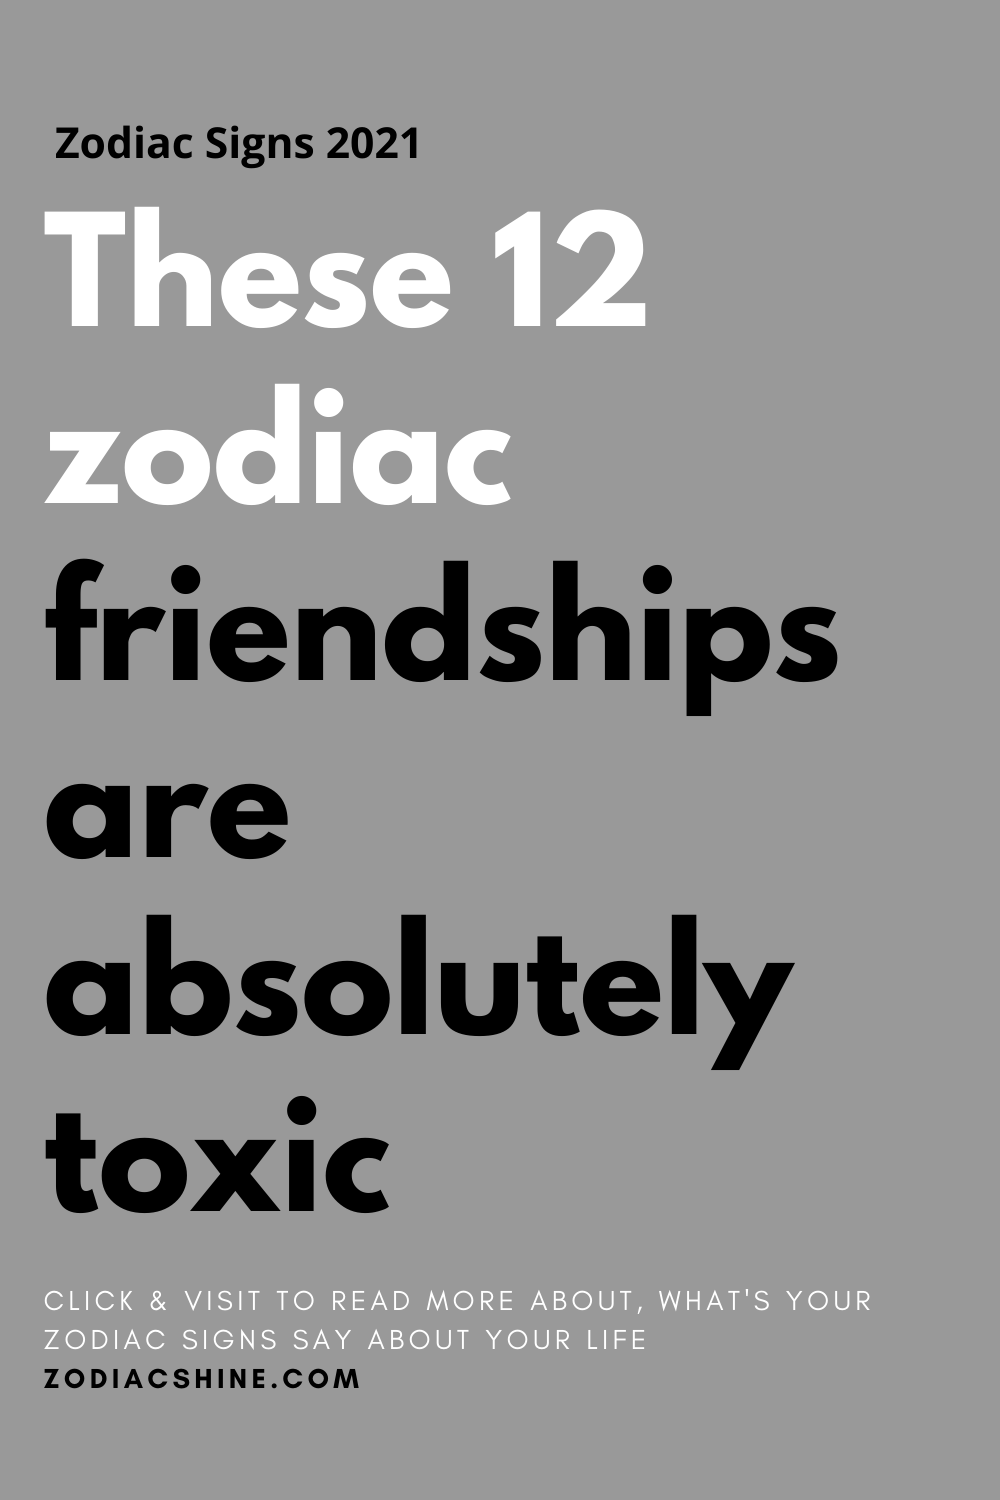 These 12 zodiac friendships are absolutely toxic